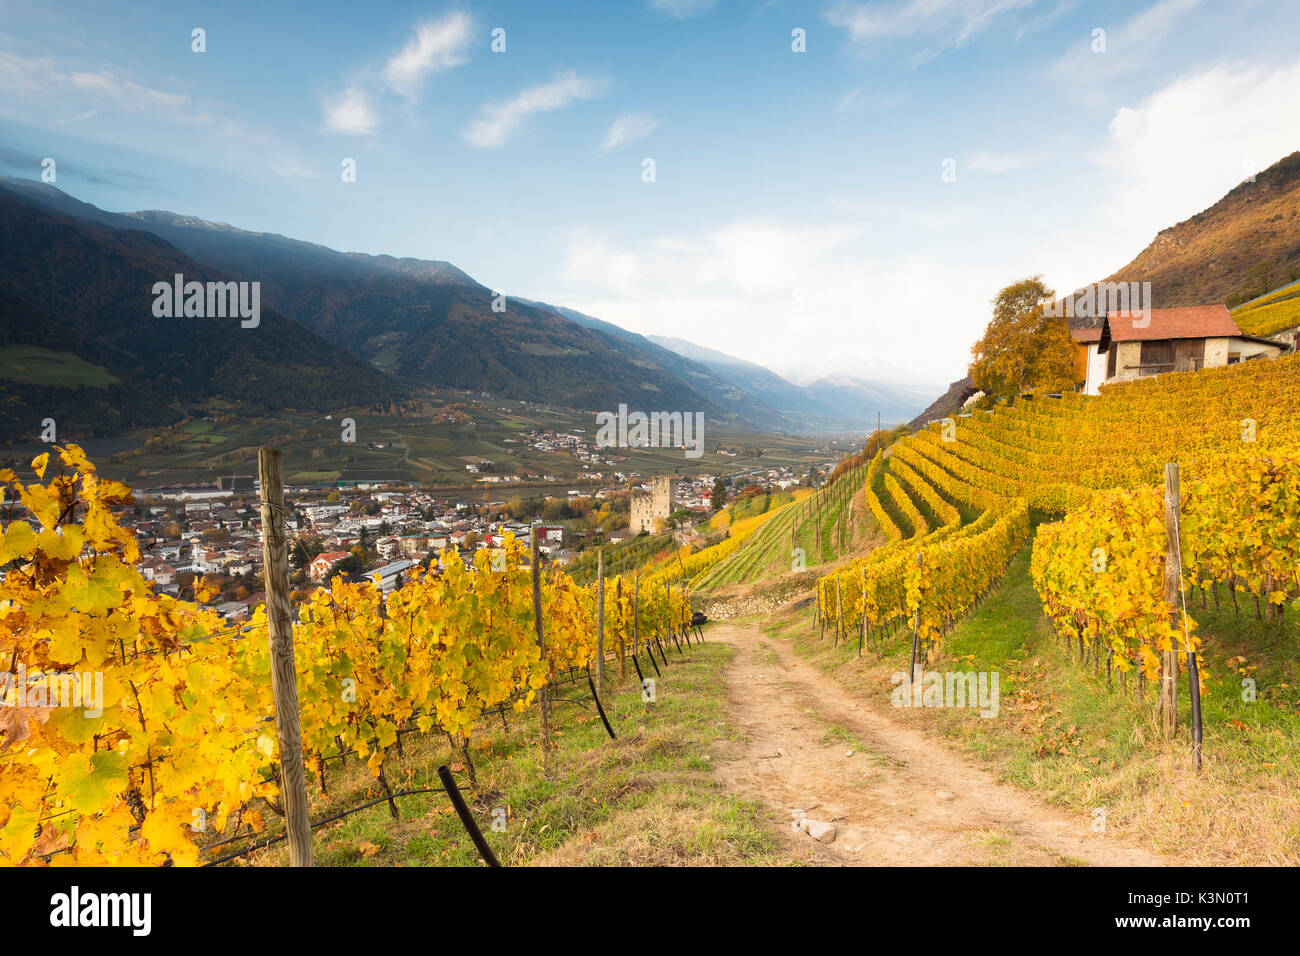 an autumnal view of the village of Naturns in the sunrise light with wineyards in the foreground, Vinschgau, Bolzano province, South Tyrol, Trentino Alto Adige, Italy, Europe Stock Photo